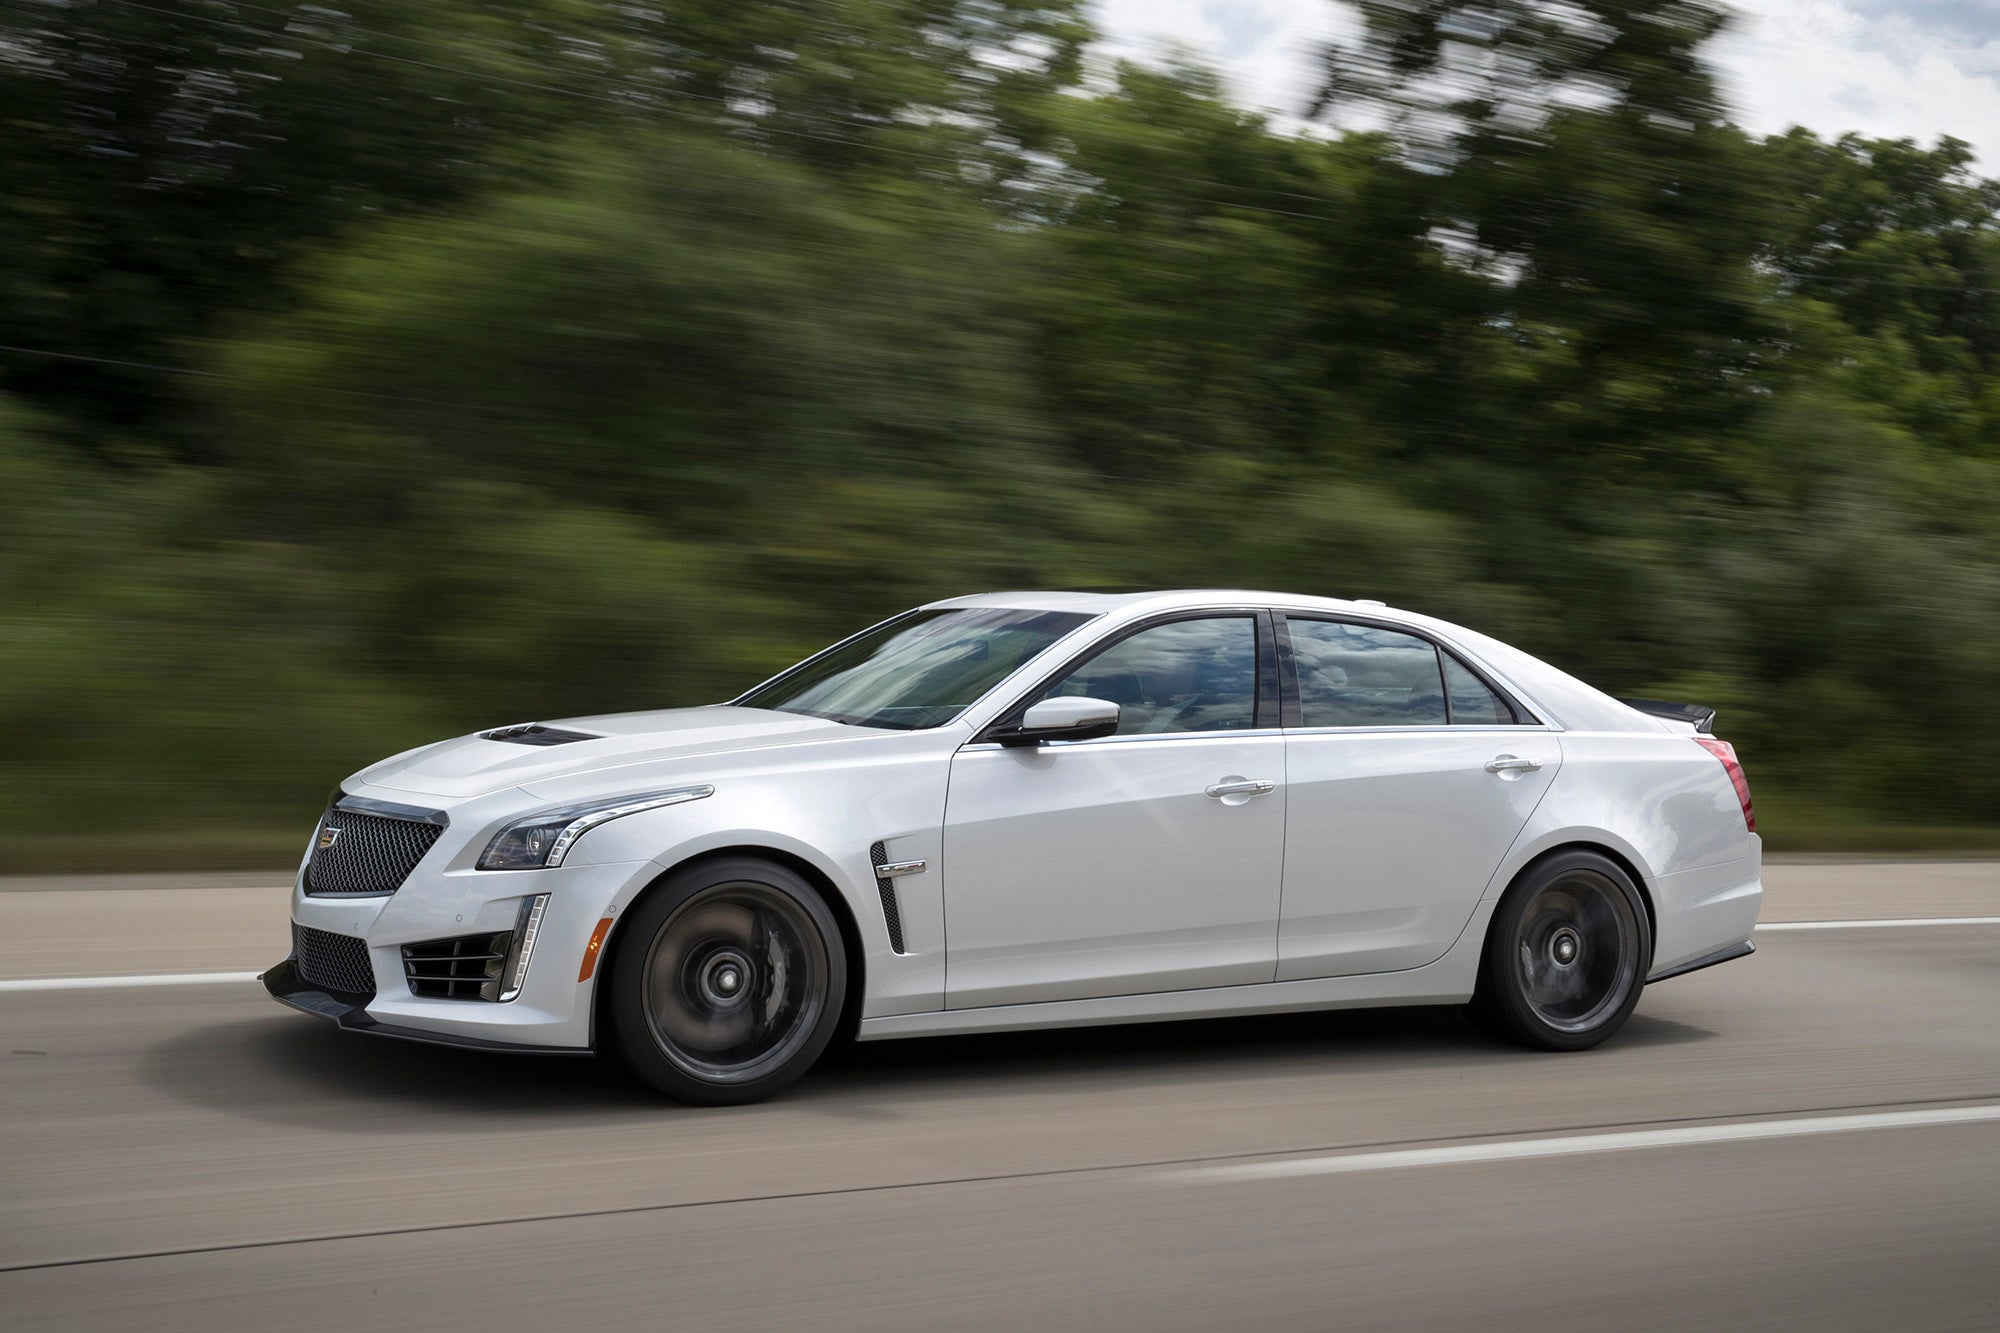 Final performance for Cadillac CTS-V